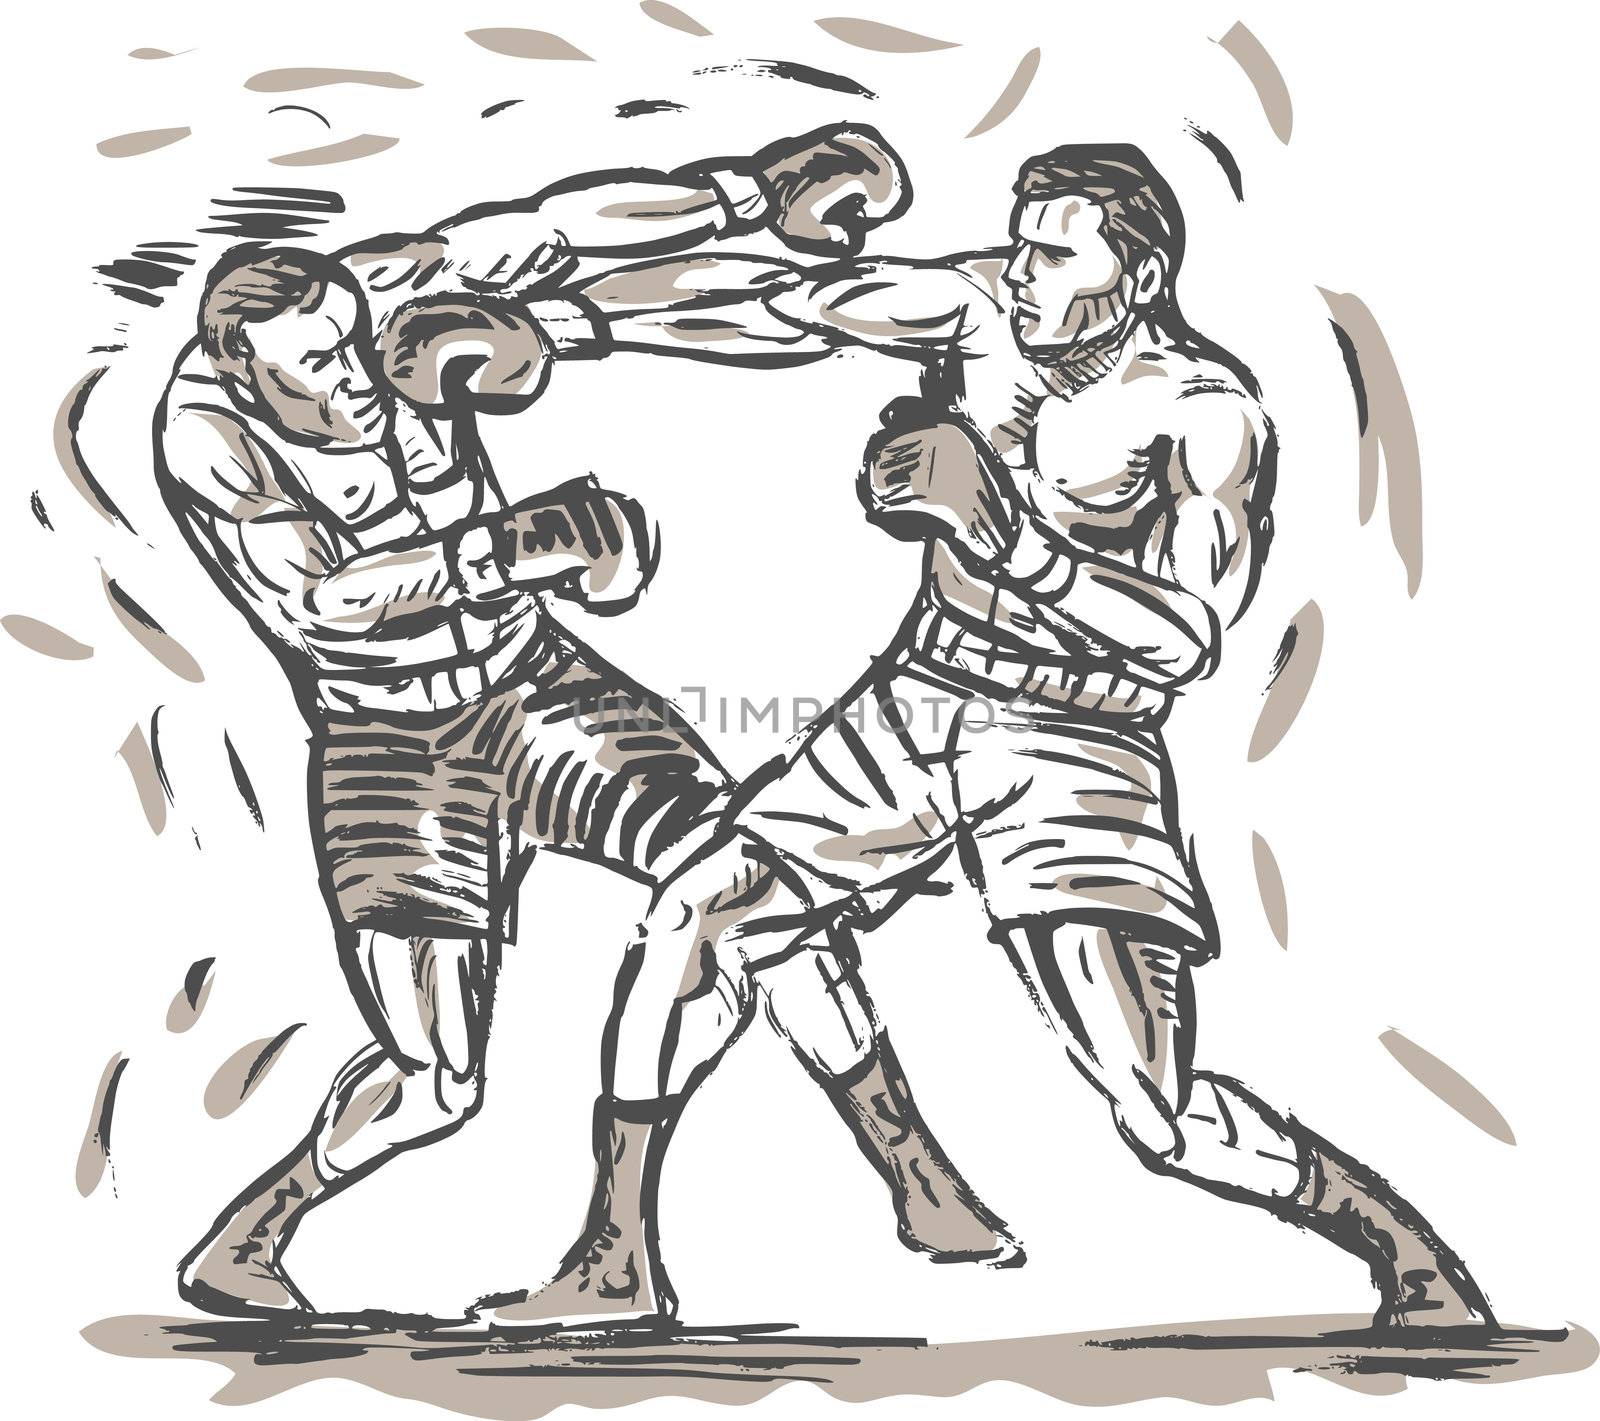 hand sketched drawing of two boxers punching